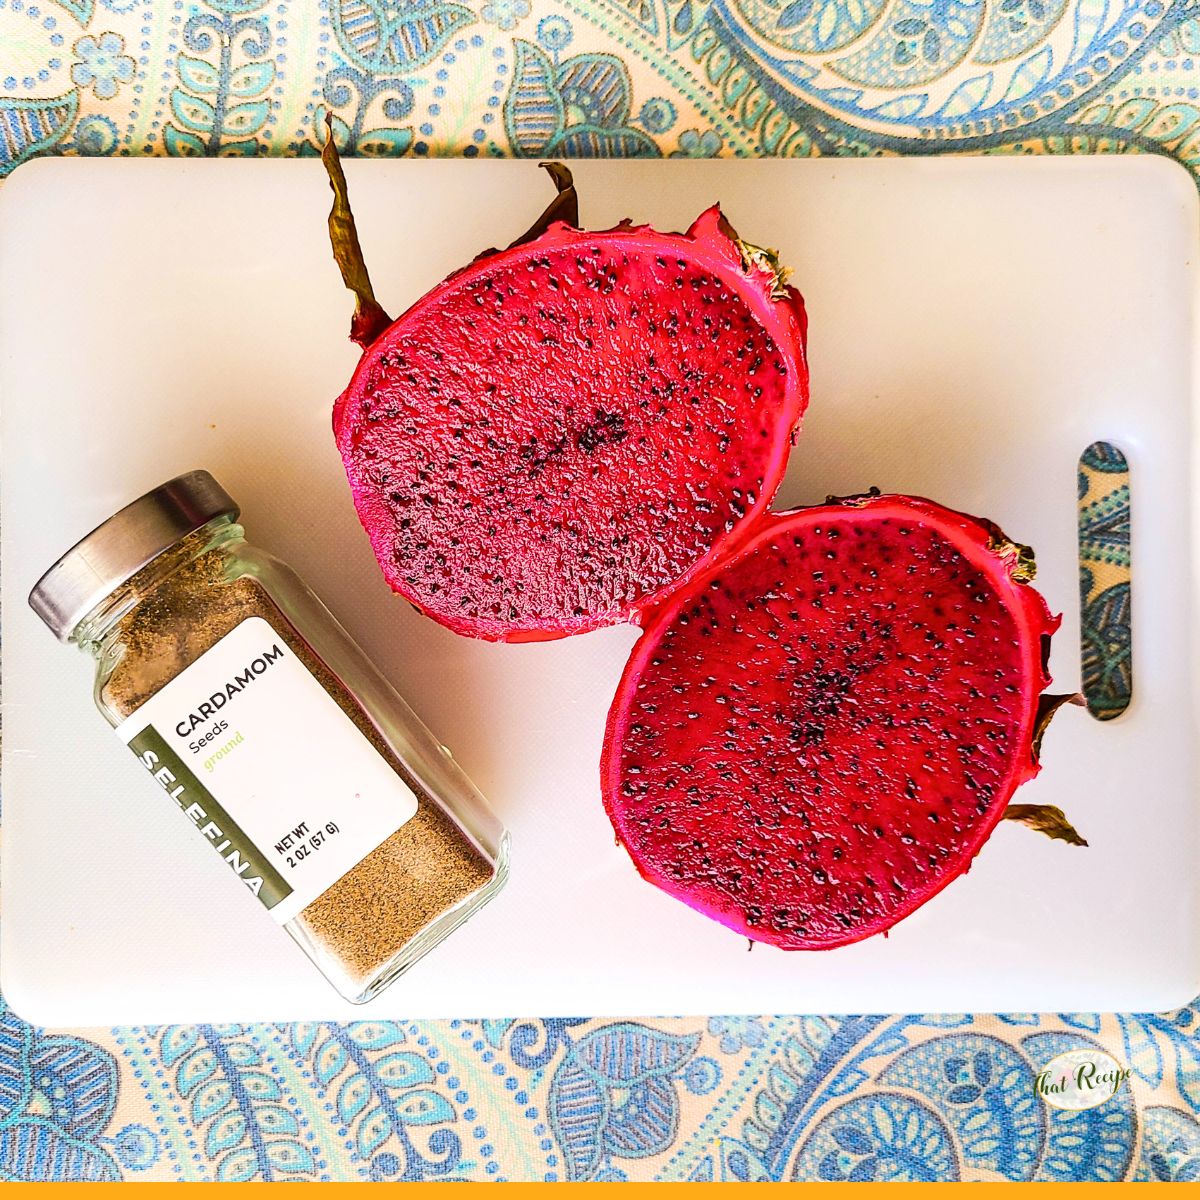 red dragon fruit with a jar of ground cardamom